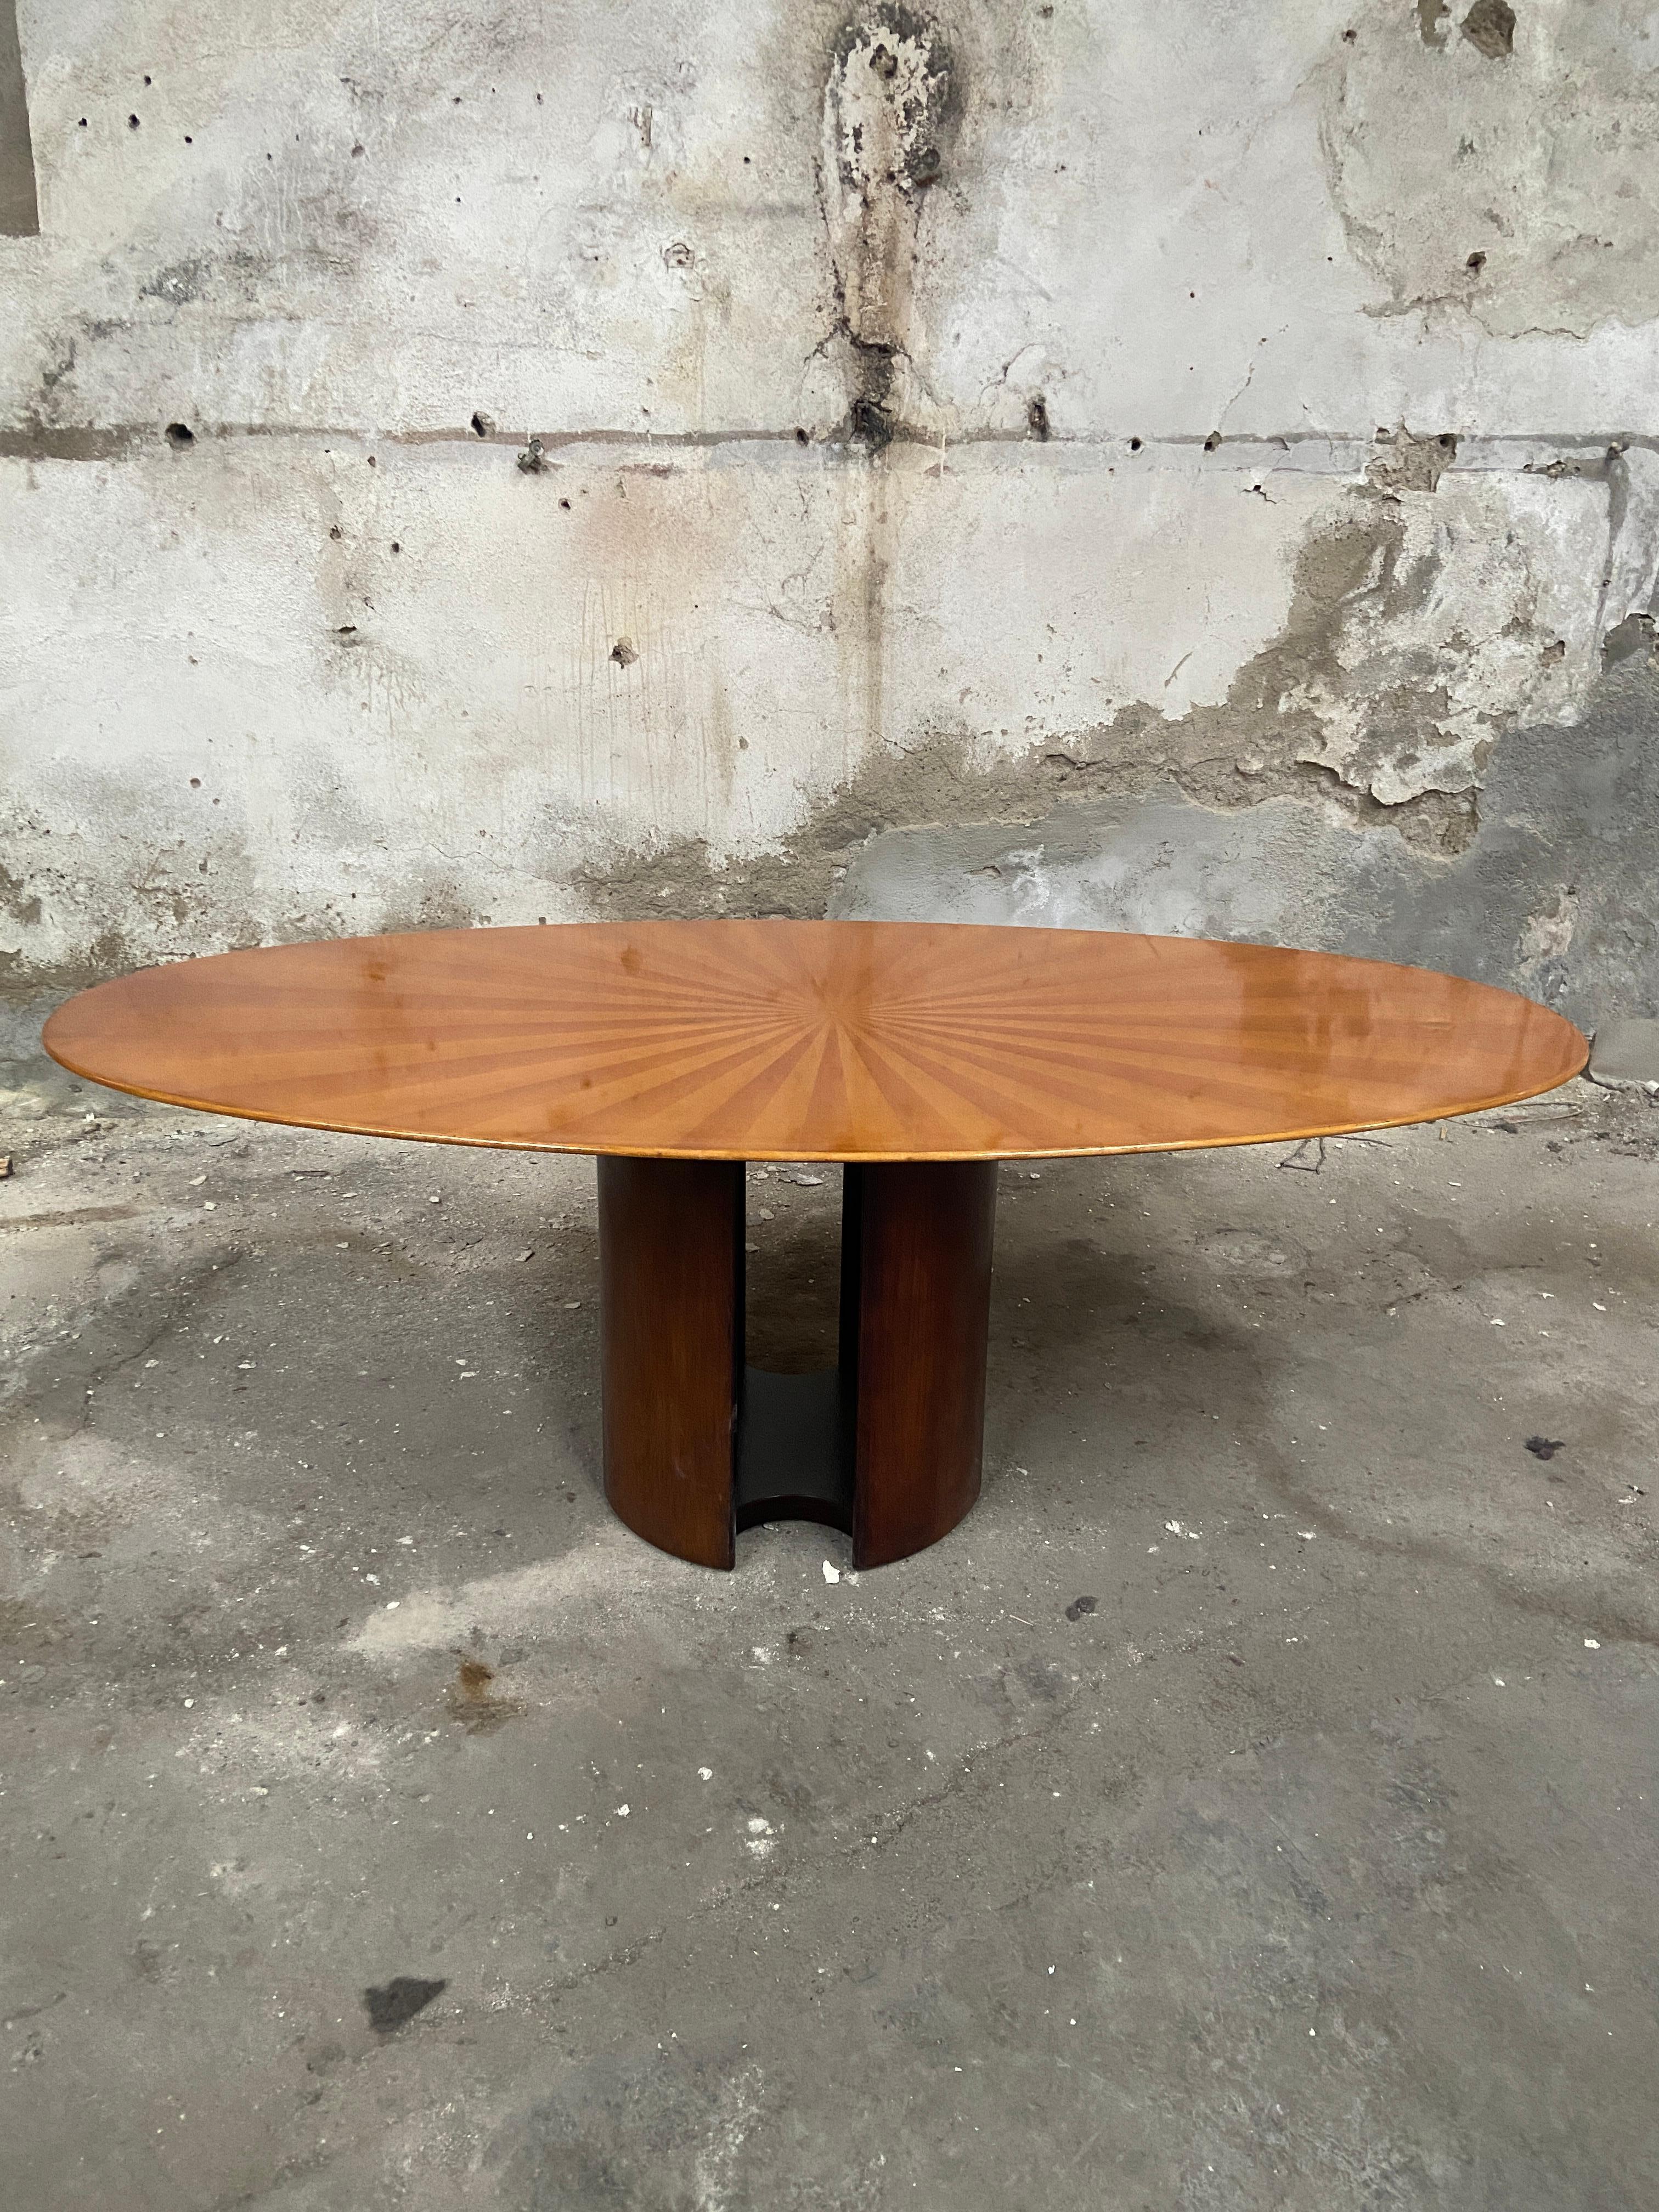 Mid-Century Modern Italian Oval Table in beech and ash in the Style of Giovanni Offredi for Saporit from 1970s
The table has been completely restored maintaining his beautiful patina gained with time and use.